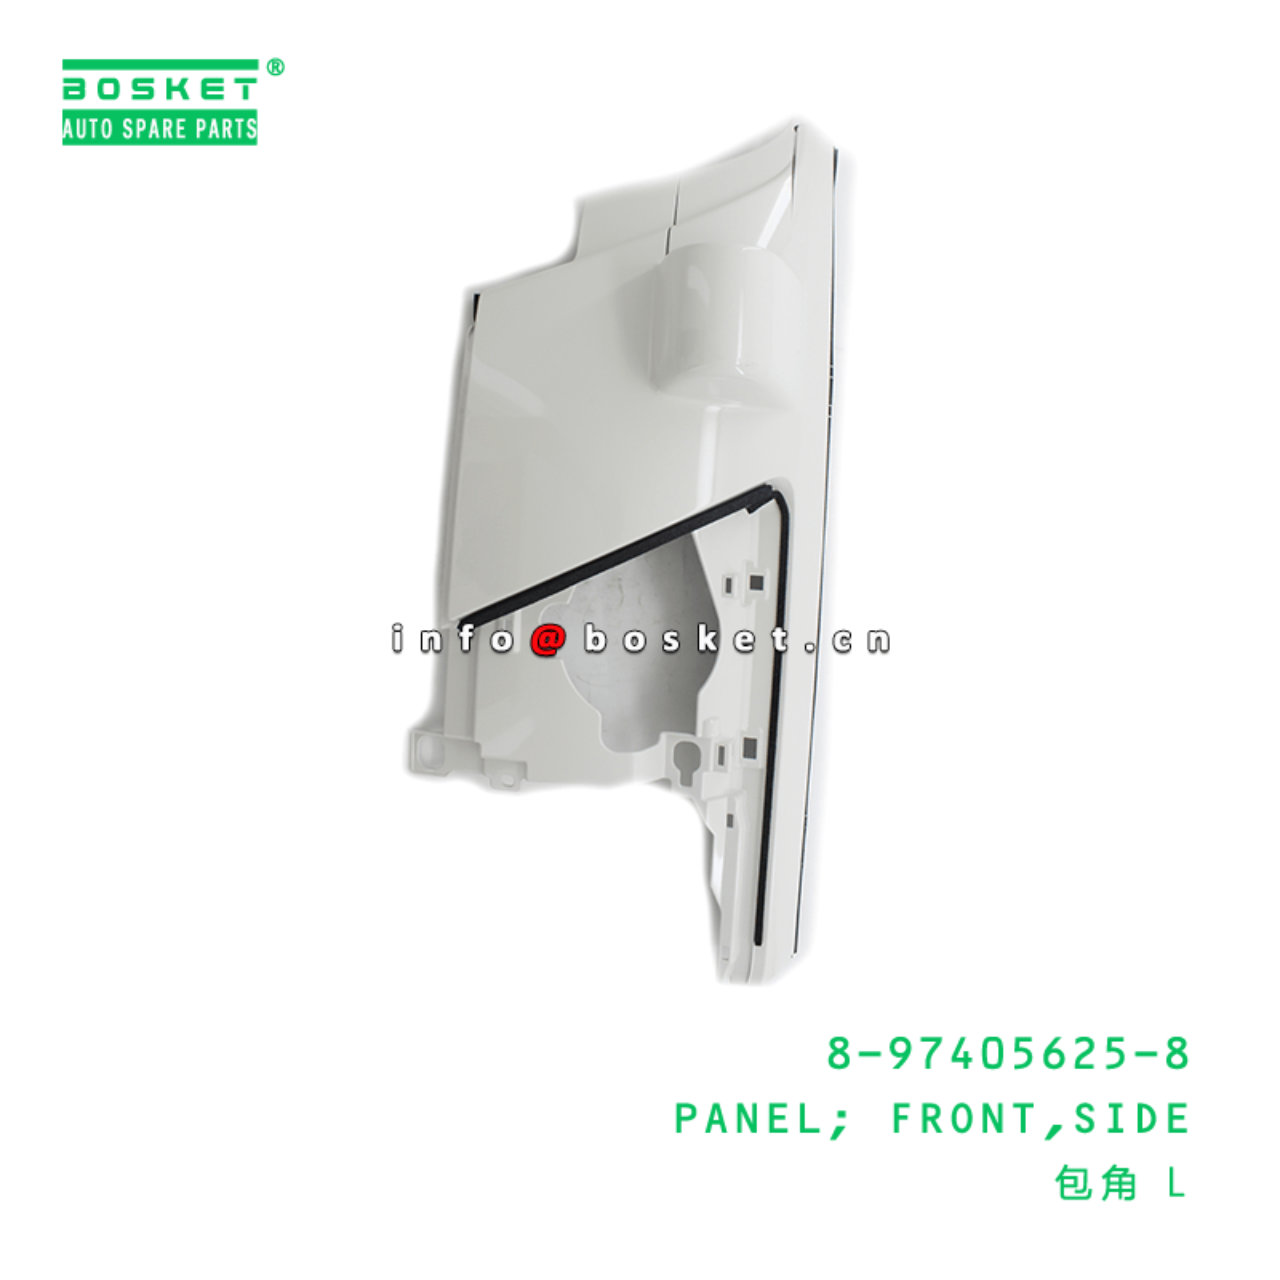 8-97405625-8 Side Front Panel 8974056258 Suitable for ISUZU NLR85